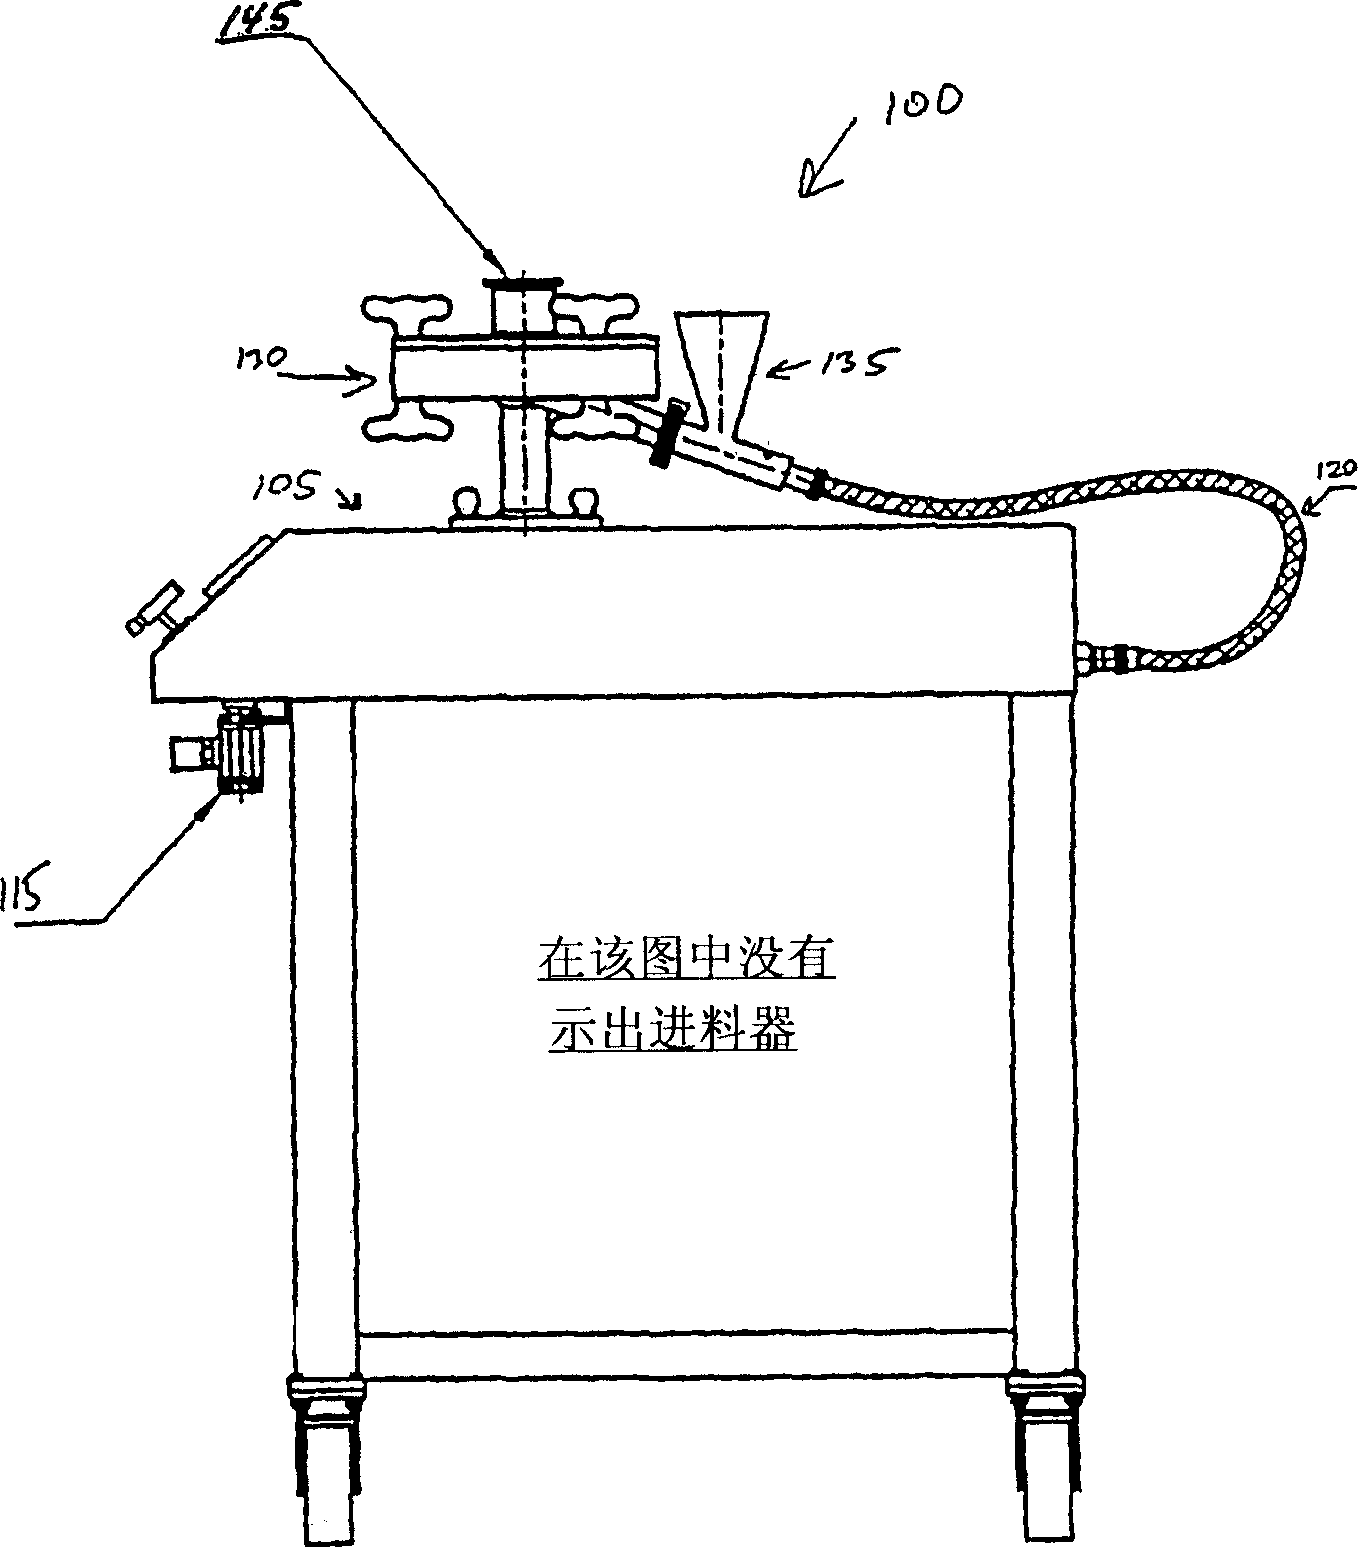 Dry particle based electrochemical apparatus and methods of making same